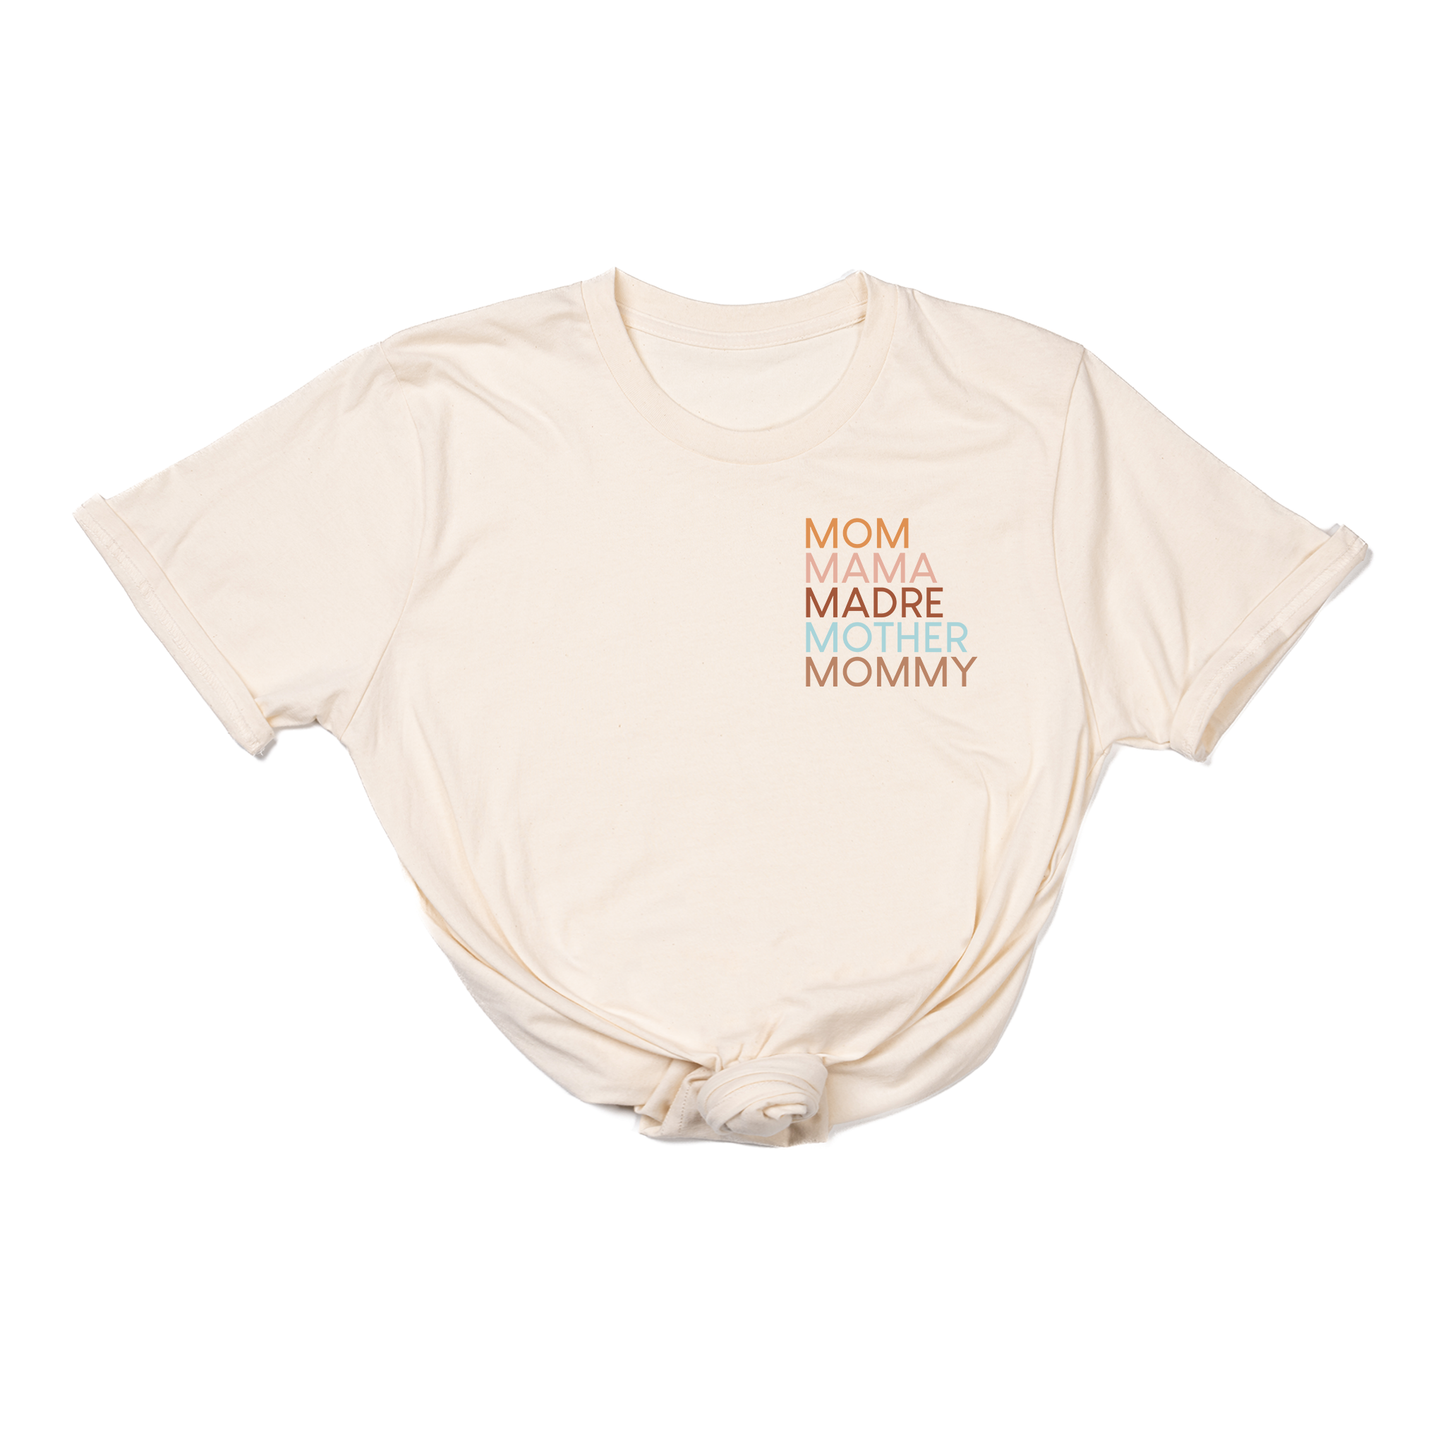 Mom Mama Madre Mother Mommy (Pocket) - Tee (Natural)